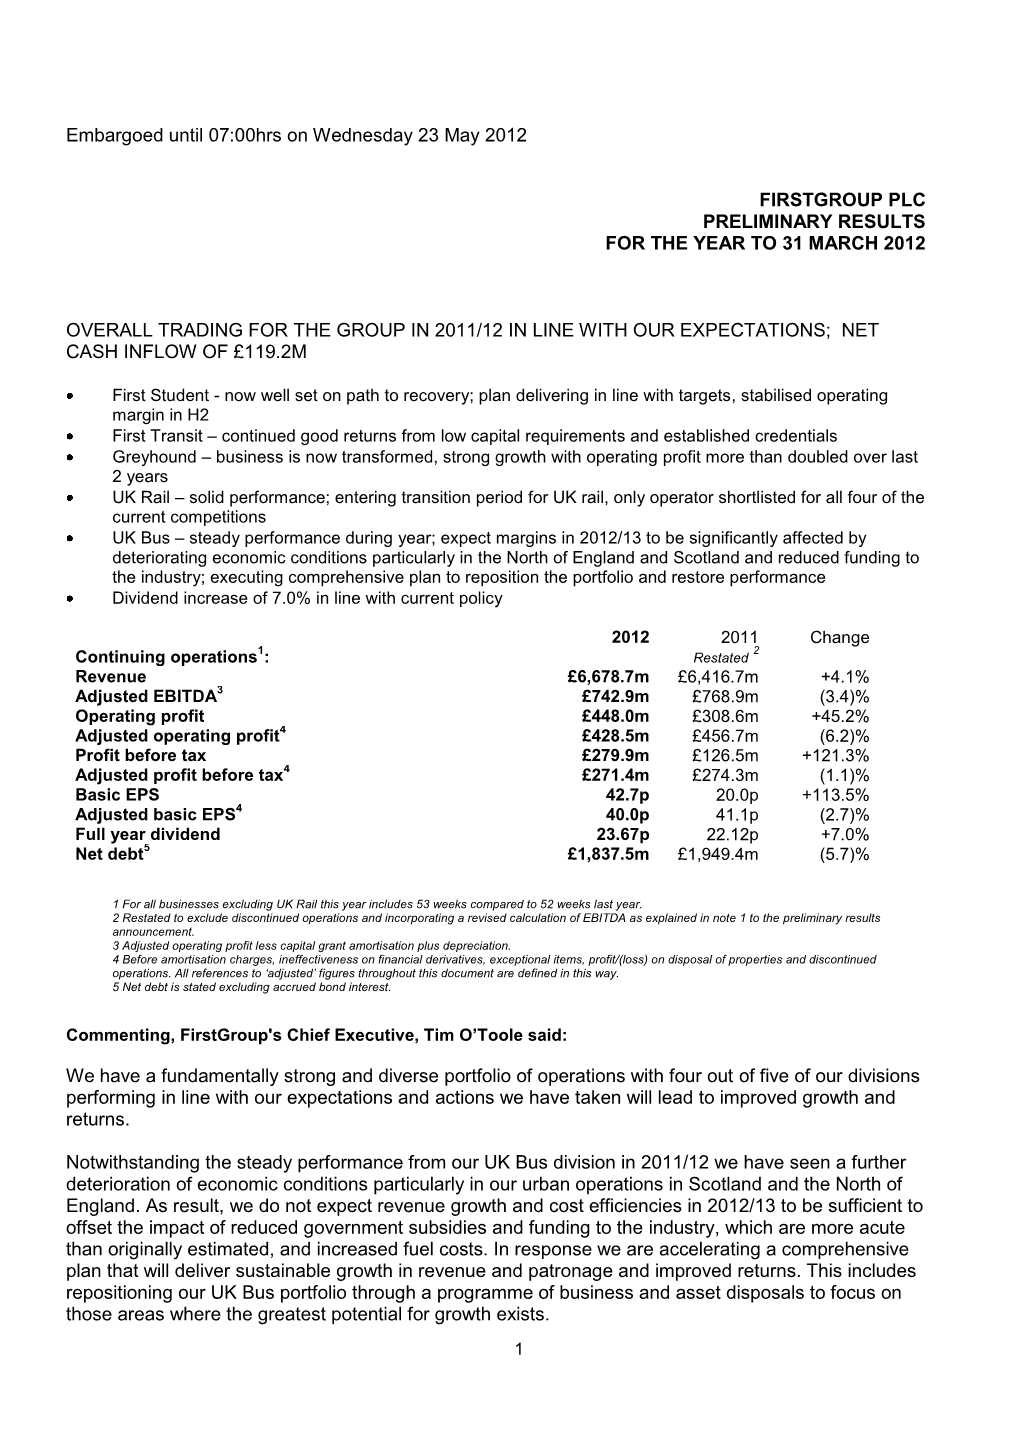 Firstgroup Plc Preliminary Results for the Year to 31 March 2012